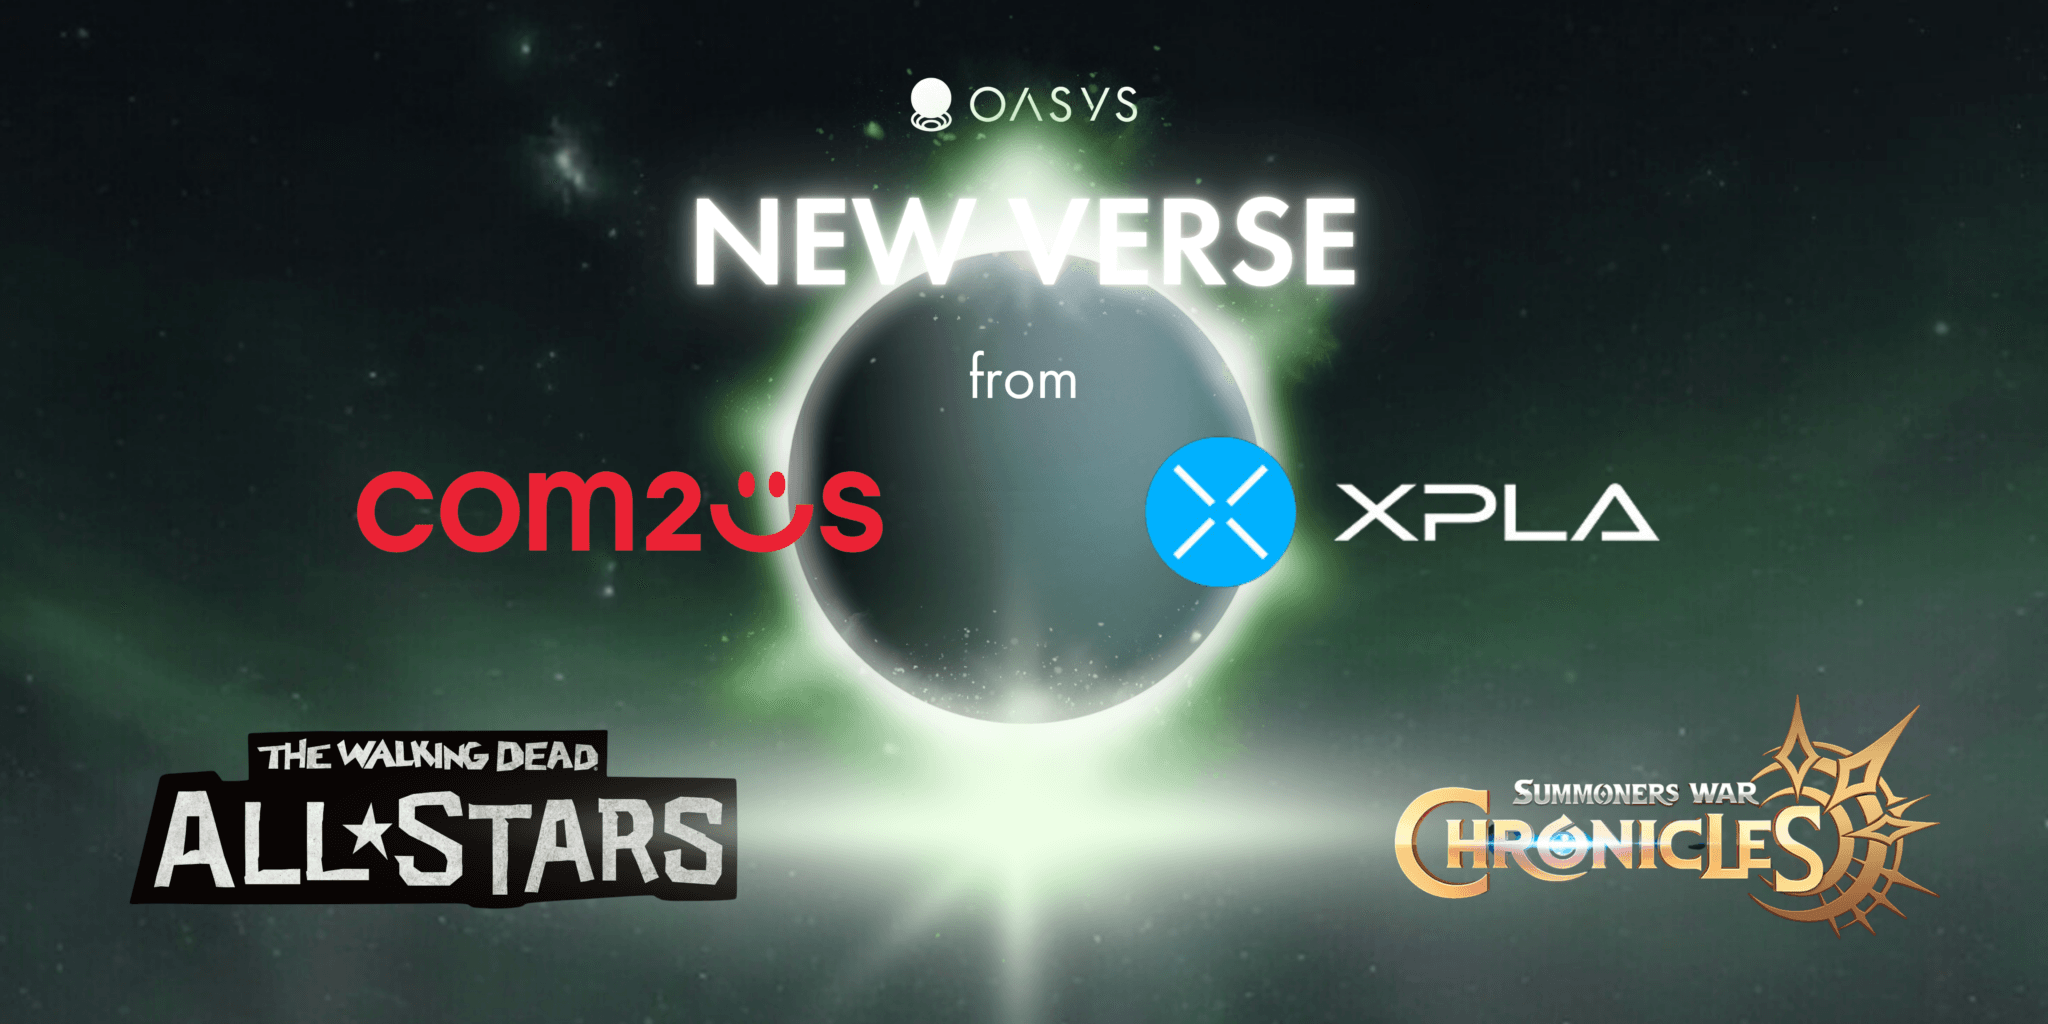 Oasys Partners with Com2uS for Web3 Gaming in Japan